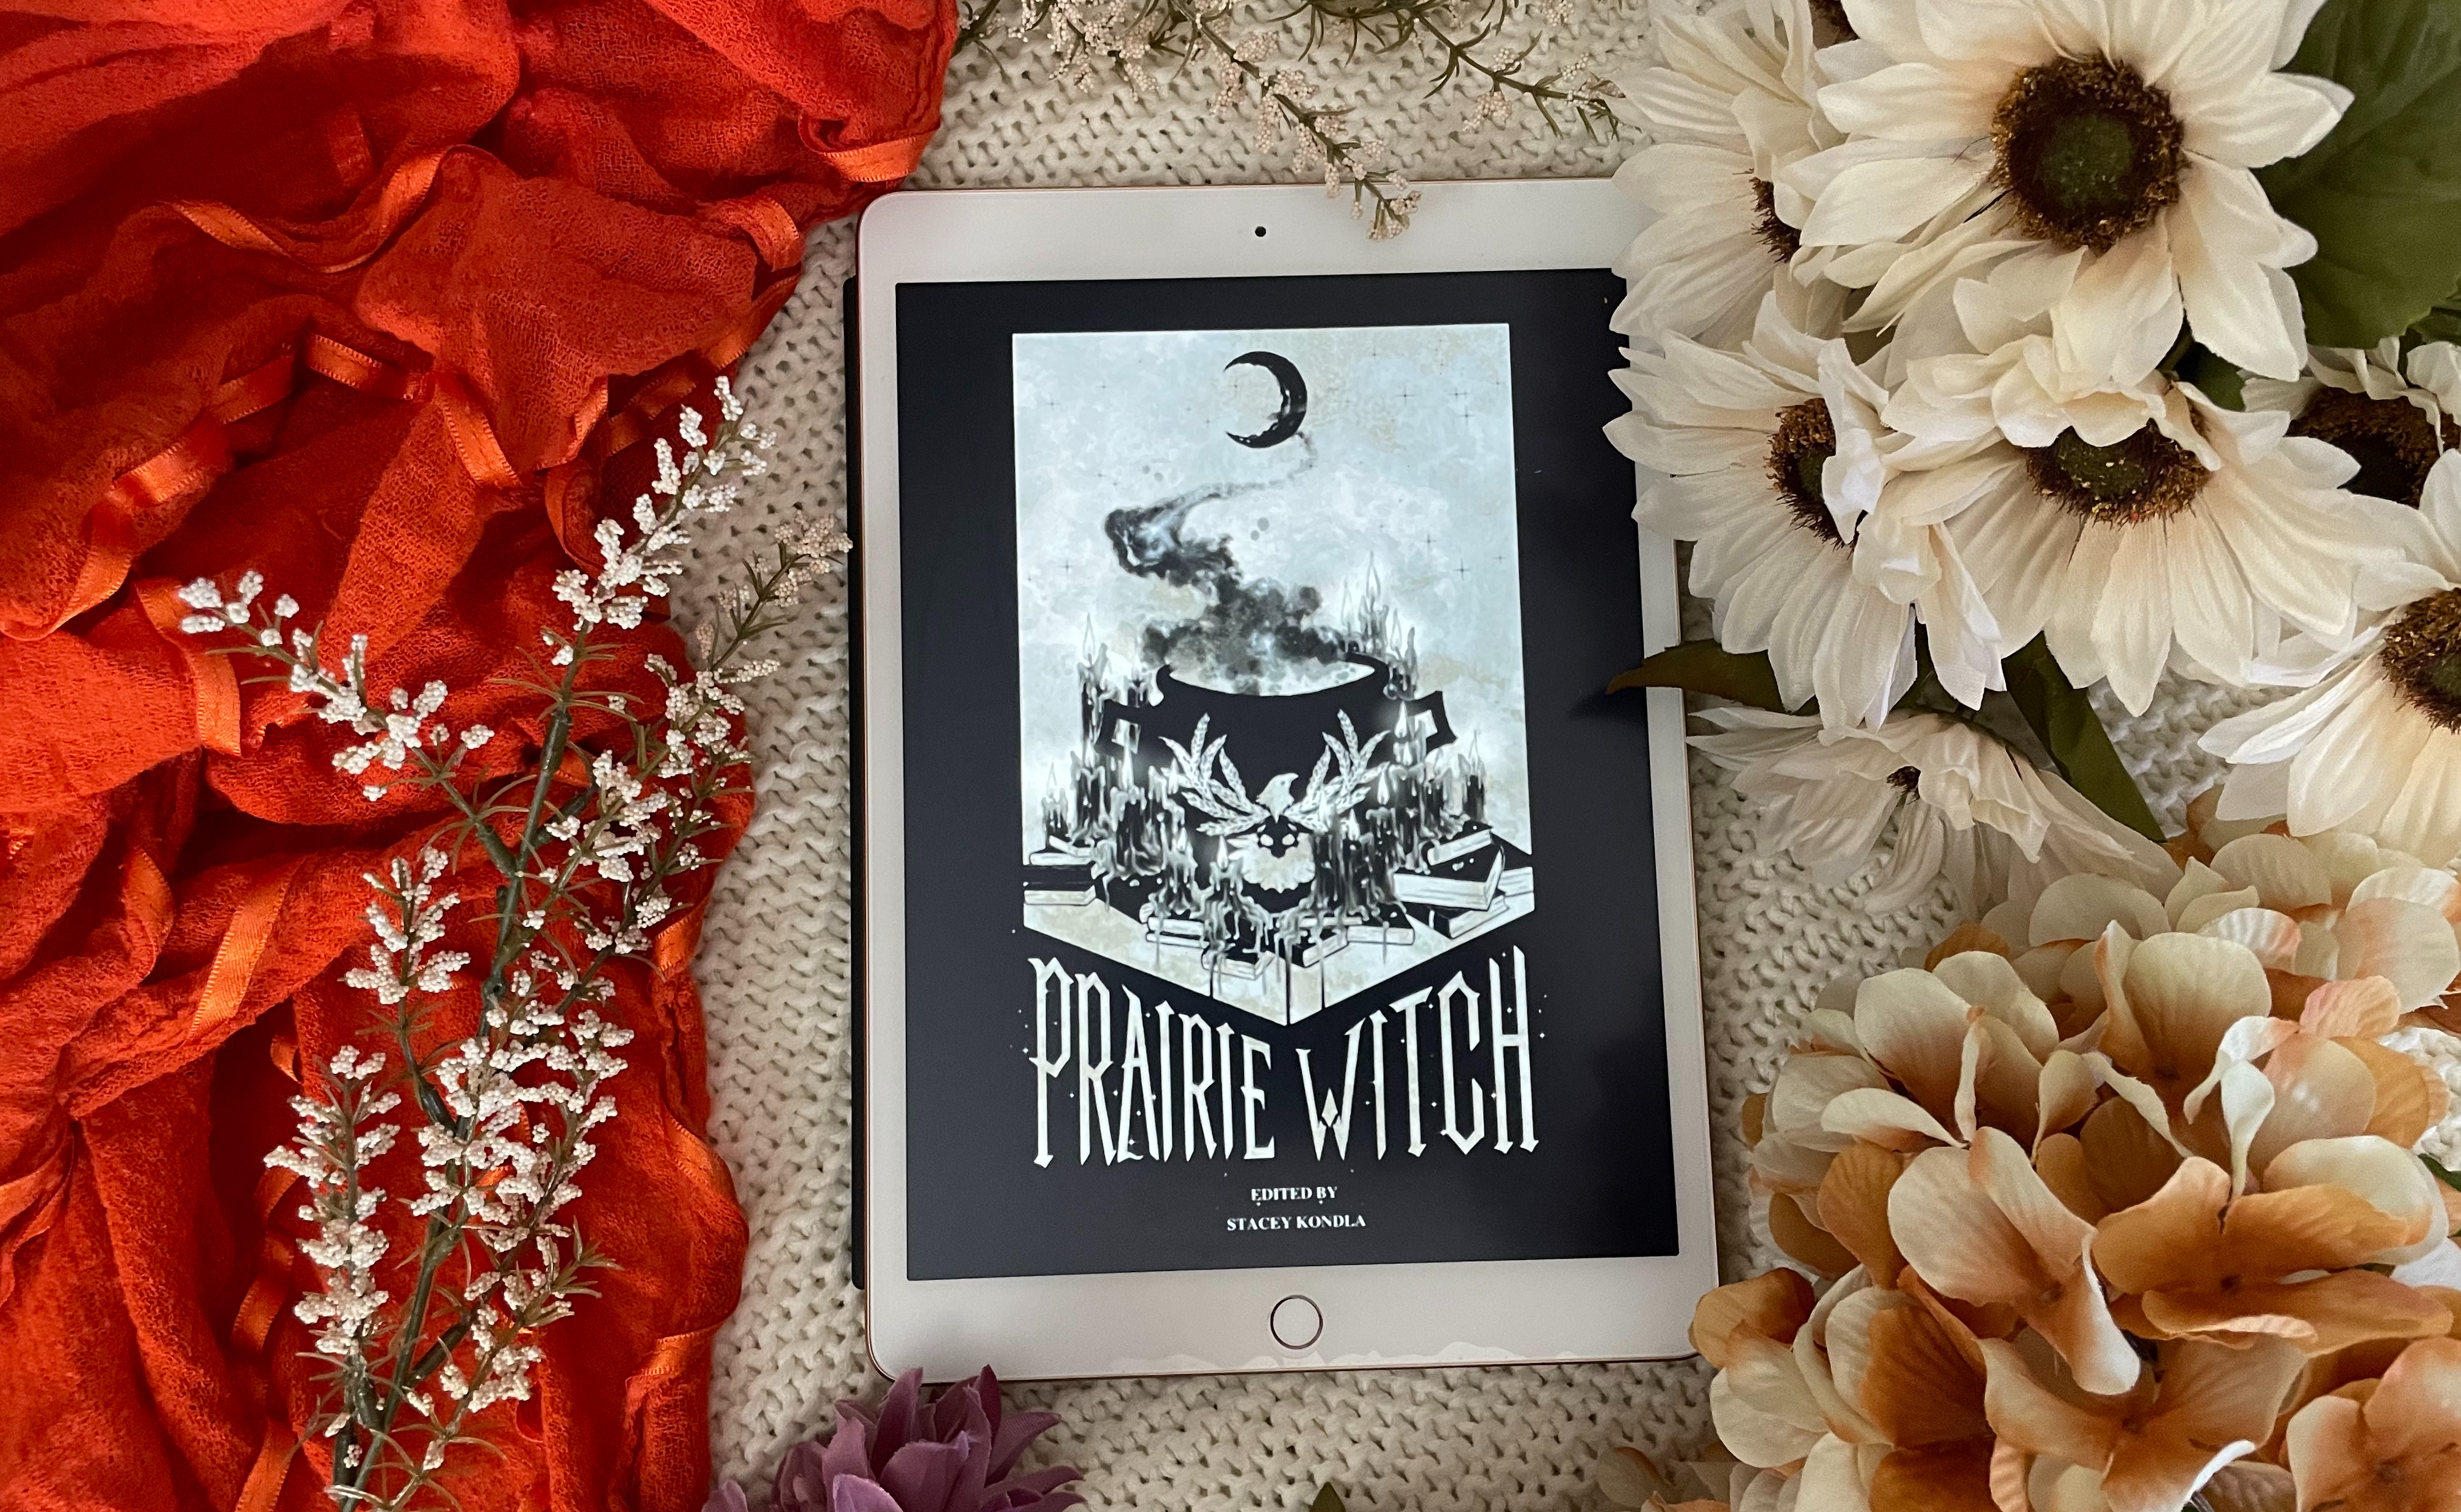 Book Prairie Witch on background of fall flowers